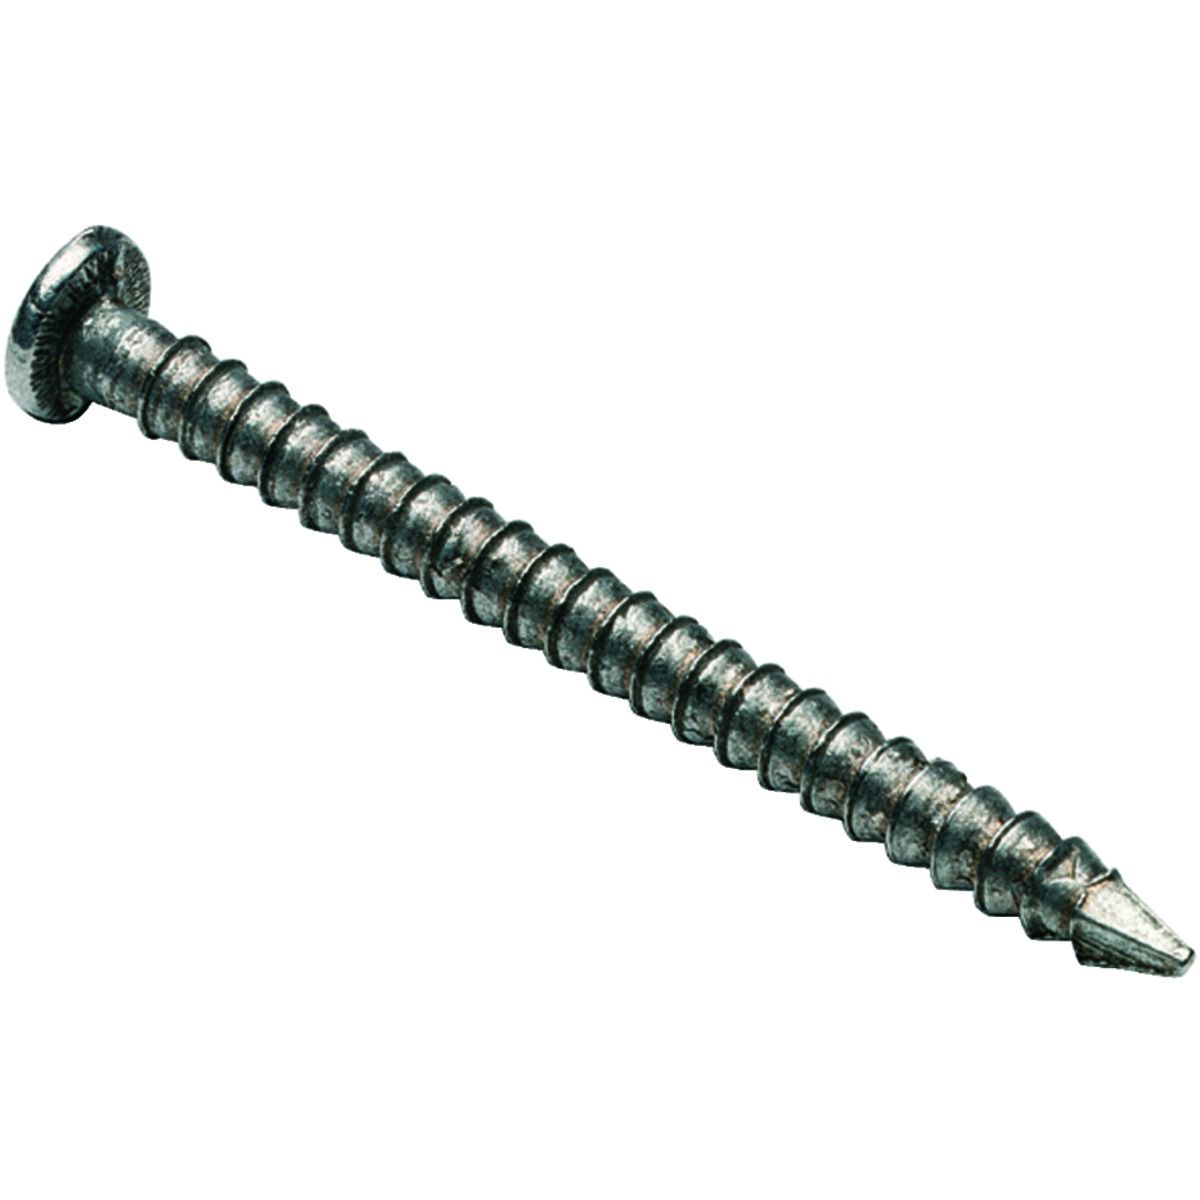 Image of Wickes 40mm Bright Annular Extra Grip Nails - 400g